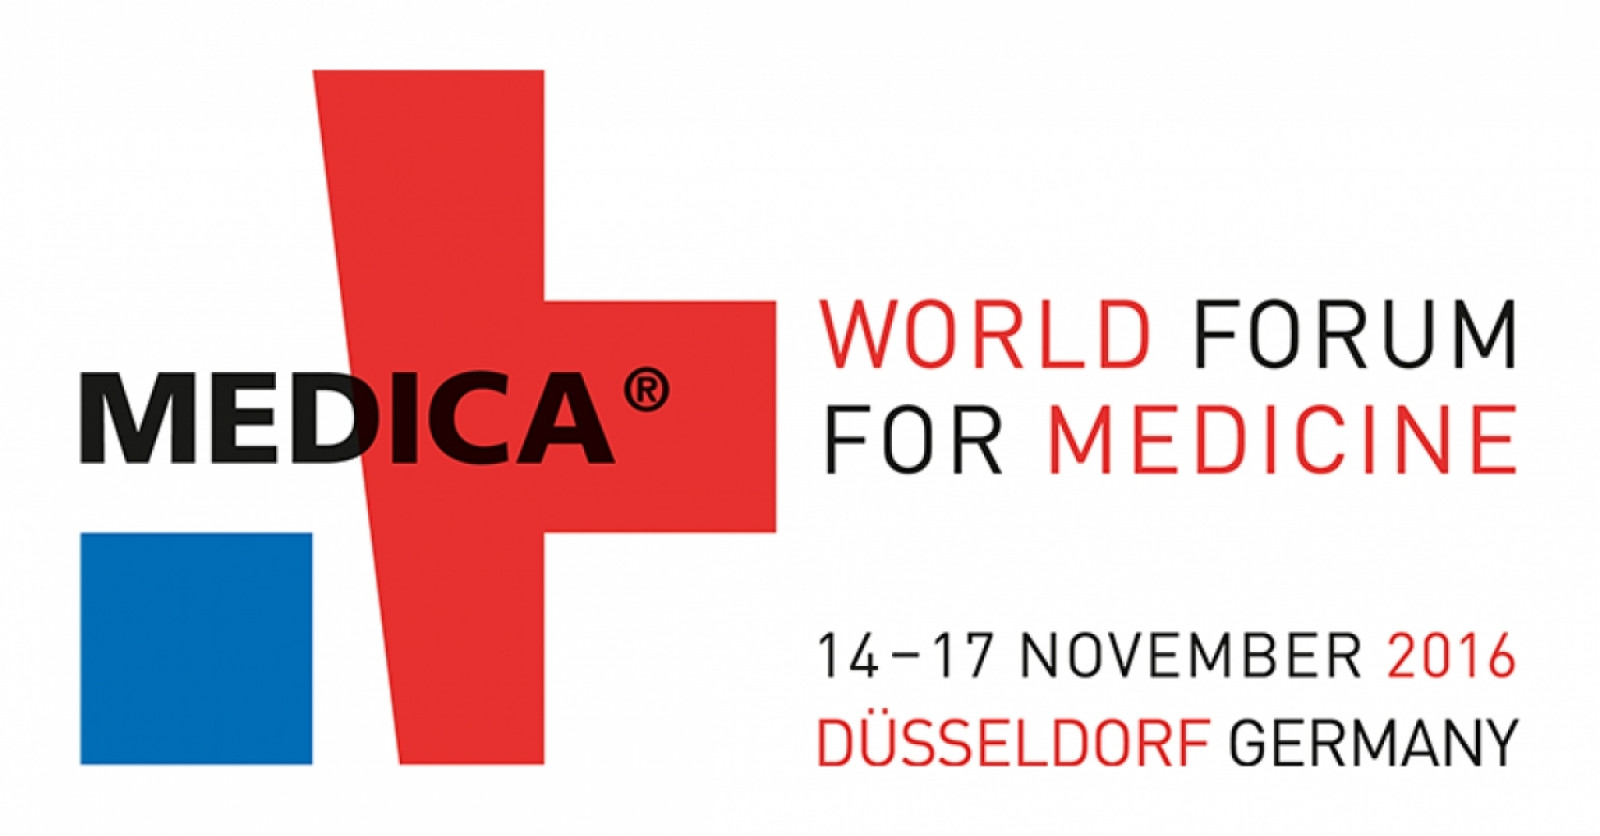 Renfrew Group exhibiting at Medica the worlds lea...